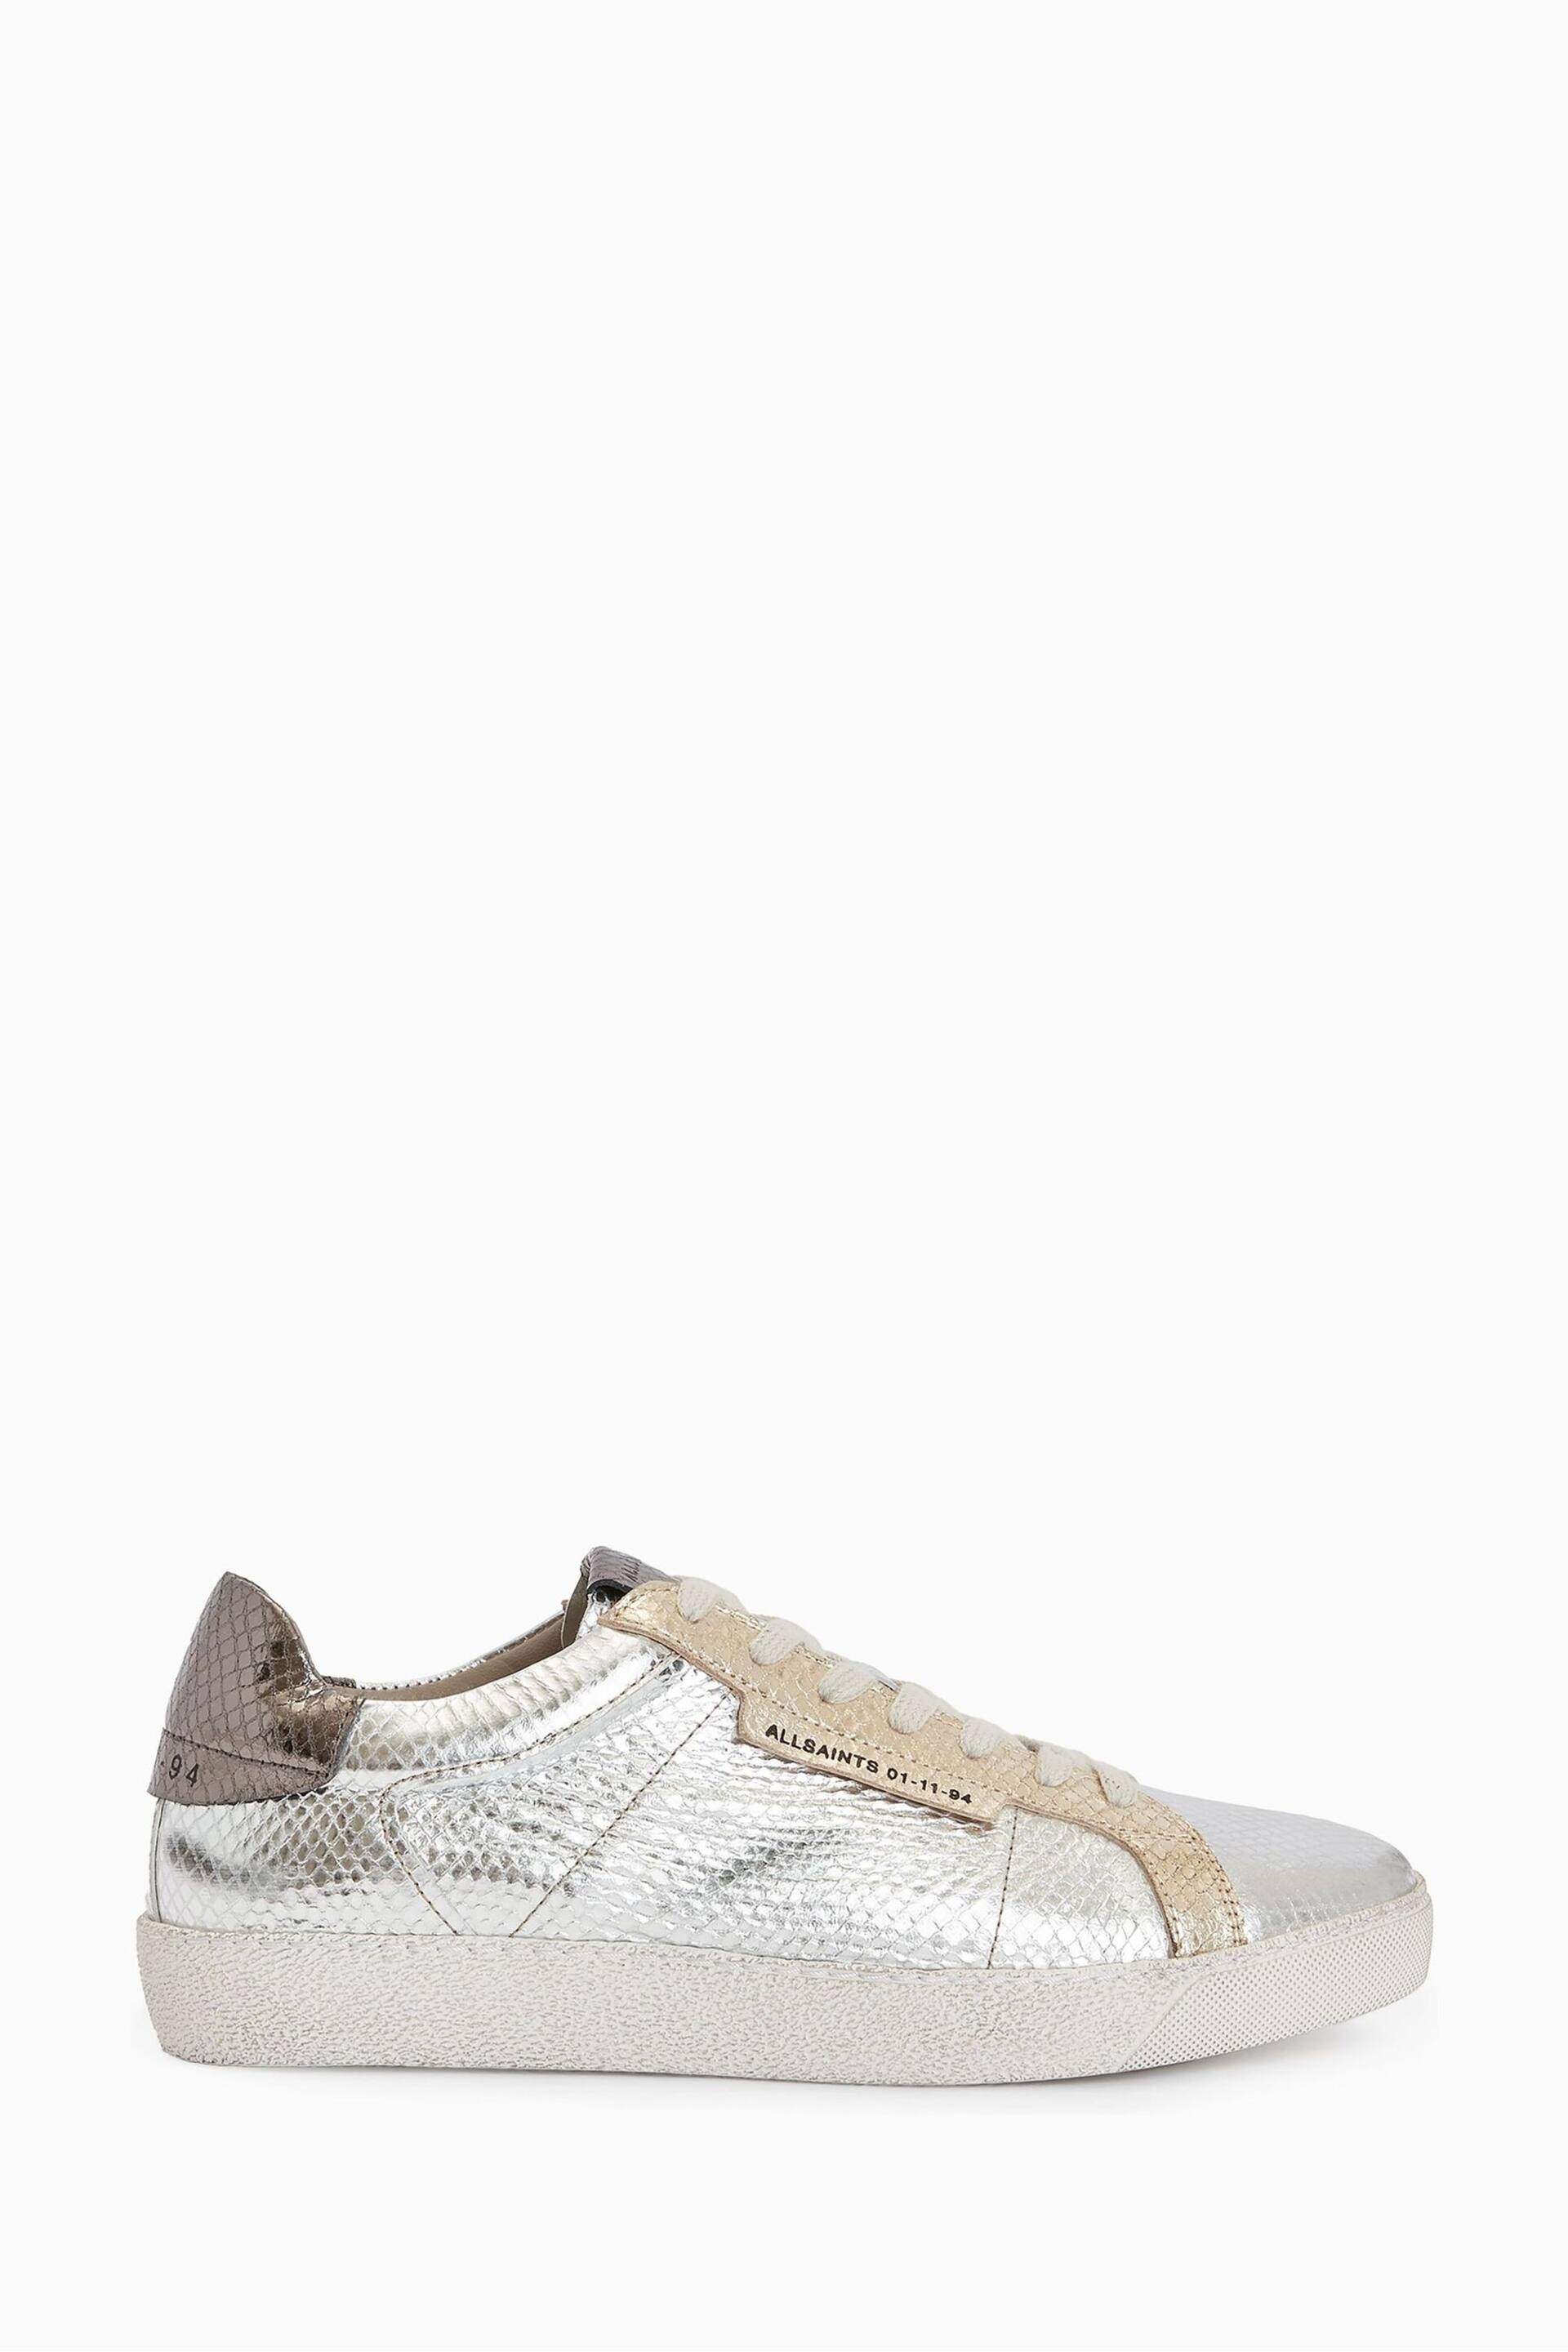 AllSaints Gold Sheer Metallic Trainers - Image 1 of 6